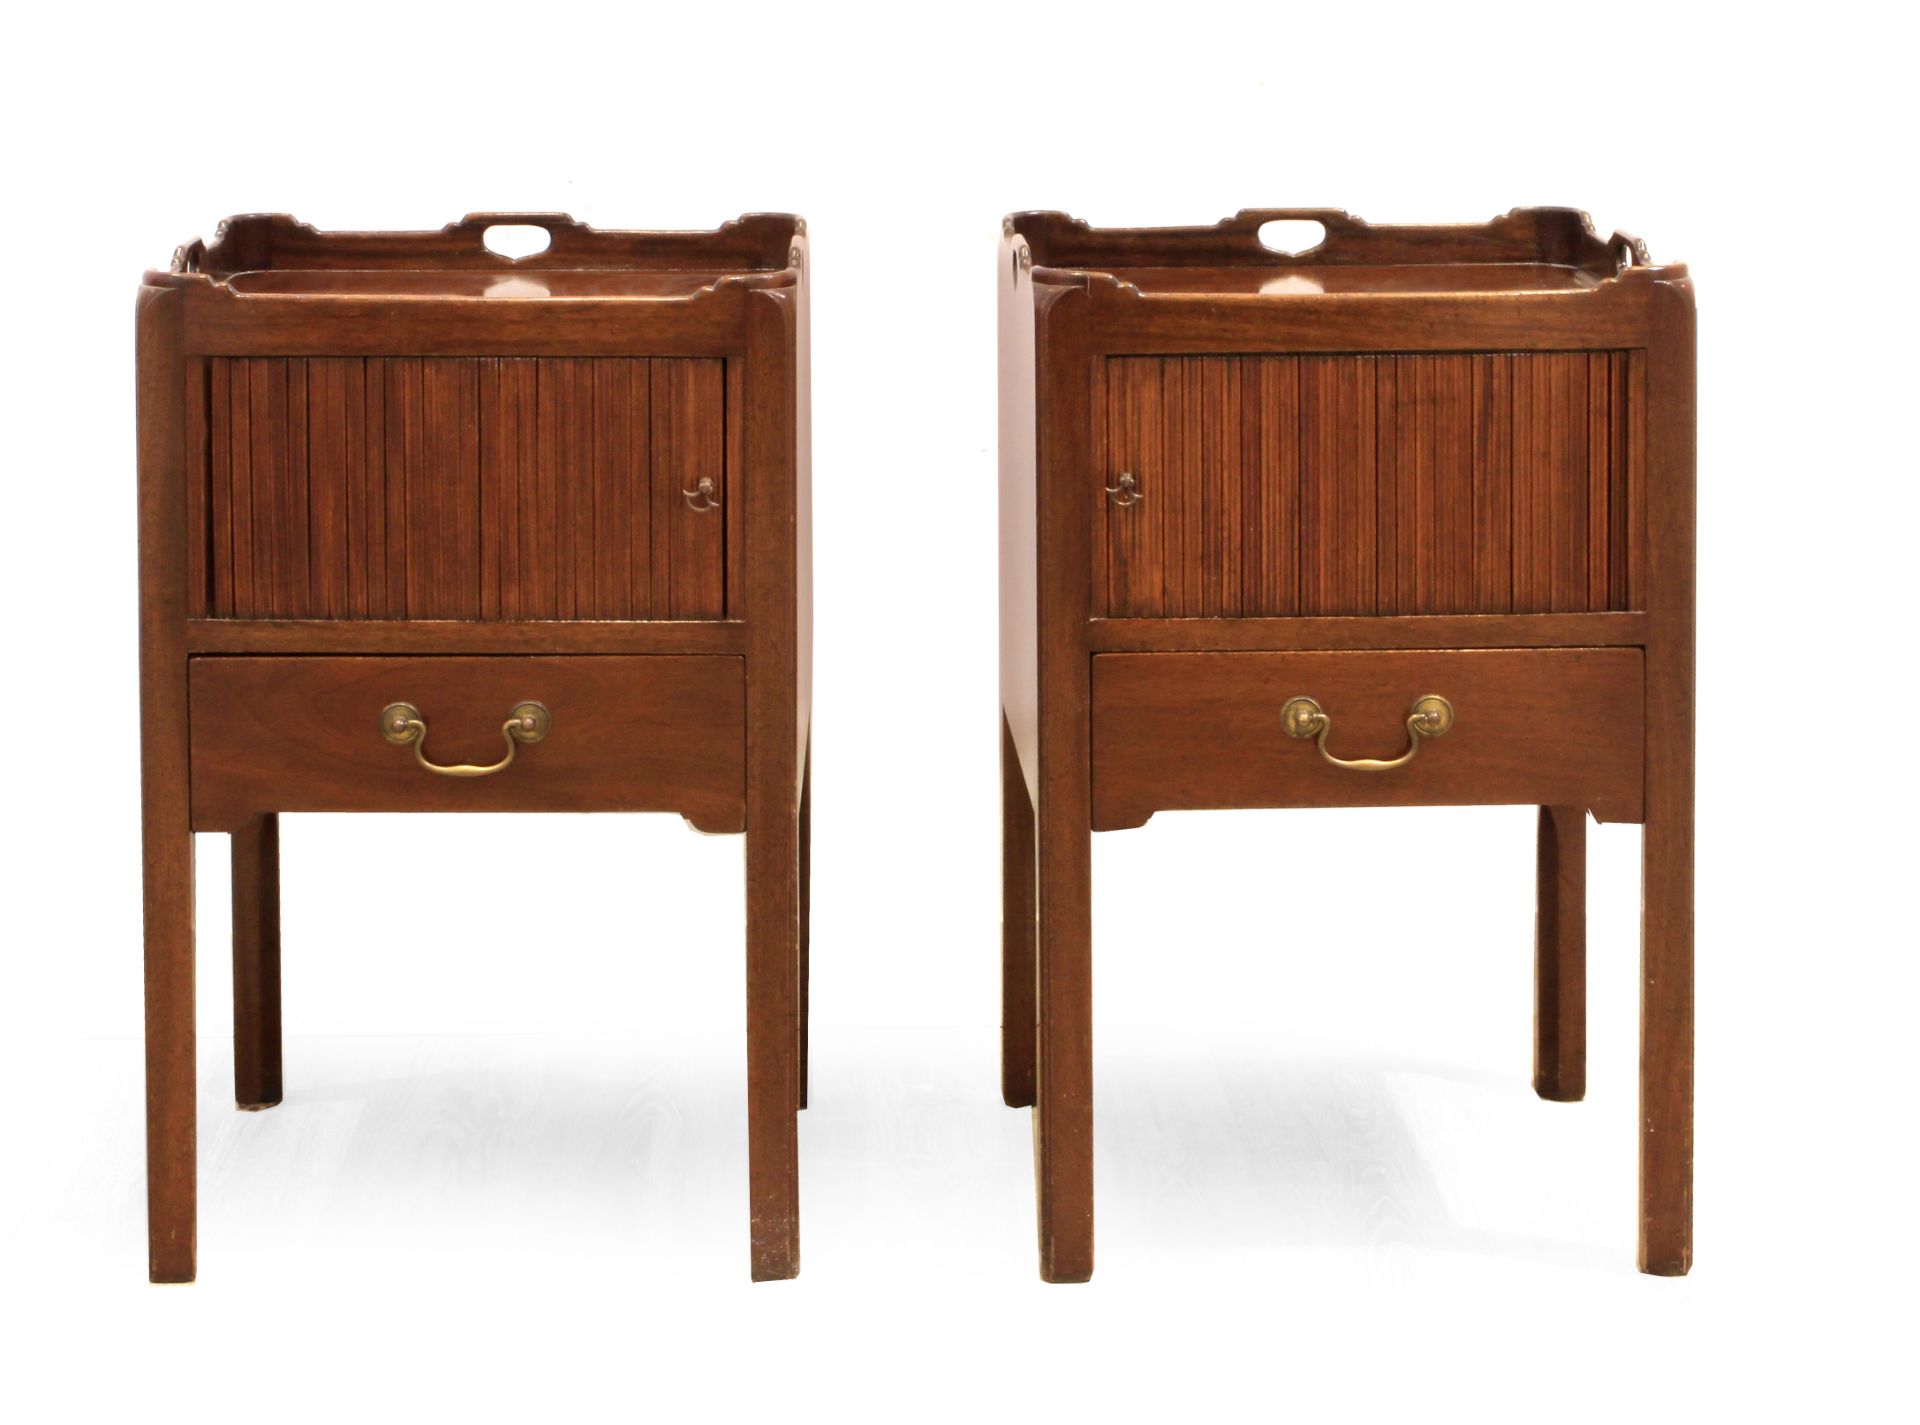 A pair of 19th century English oak nightstands - Image 4 of 4